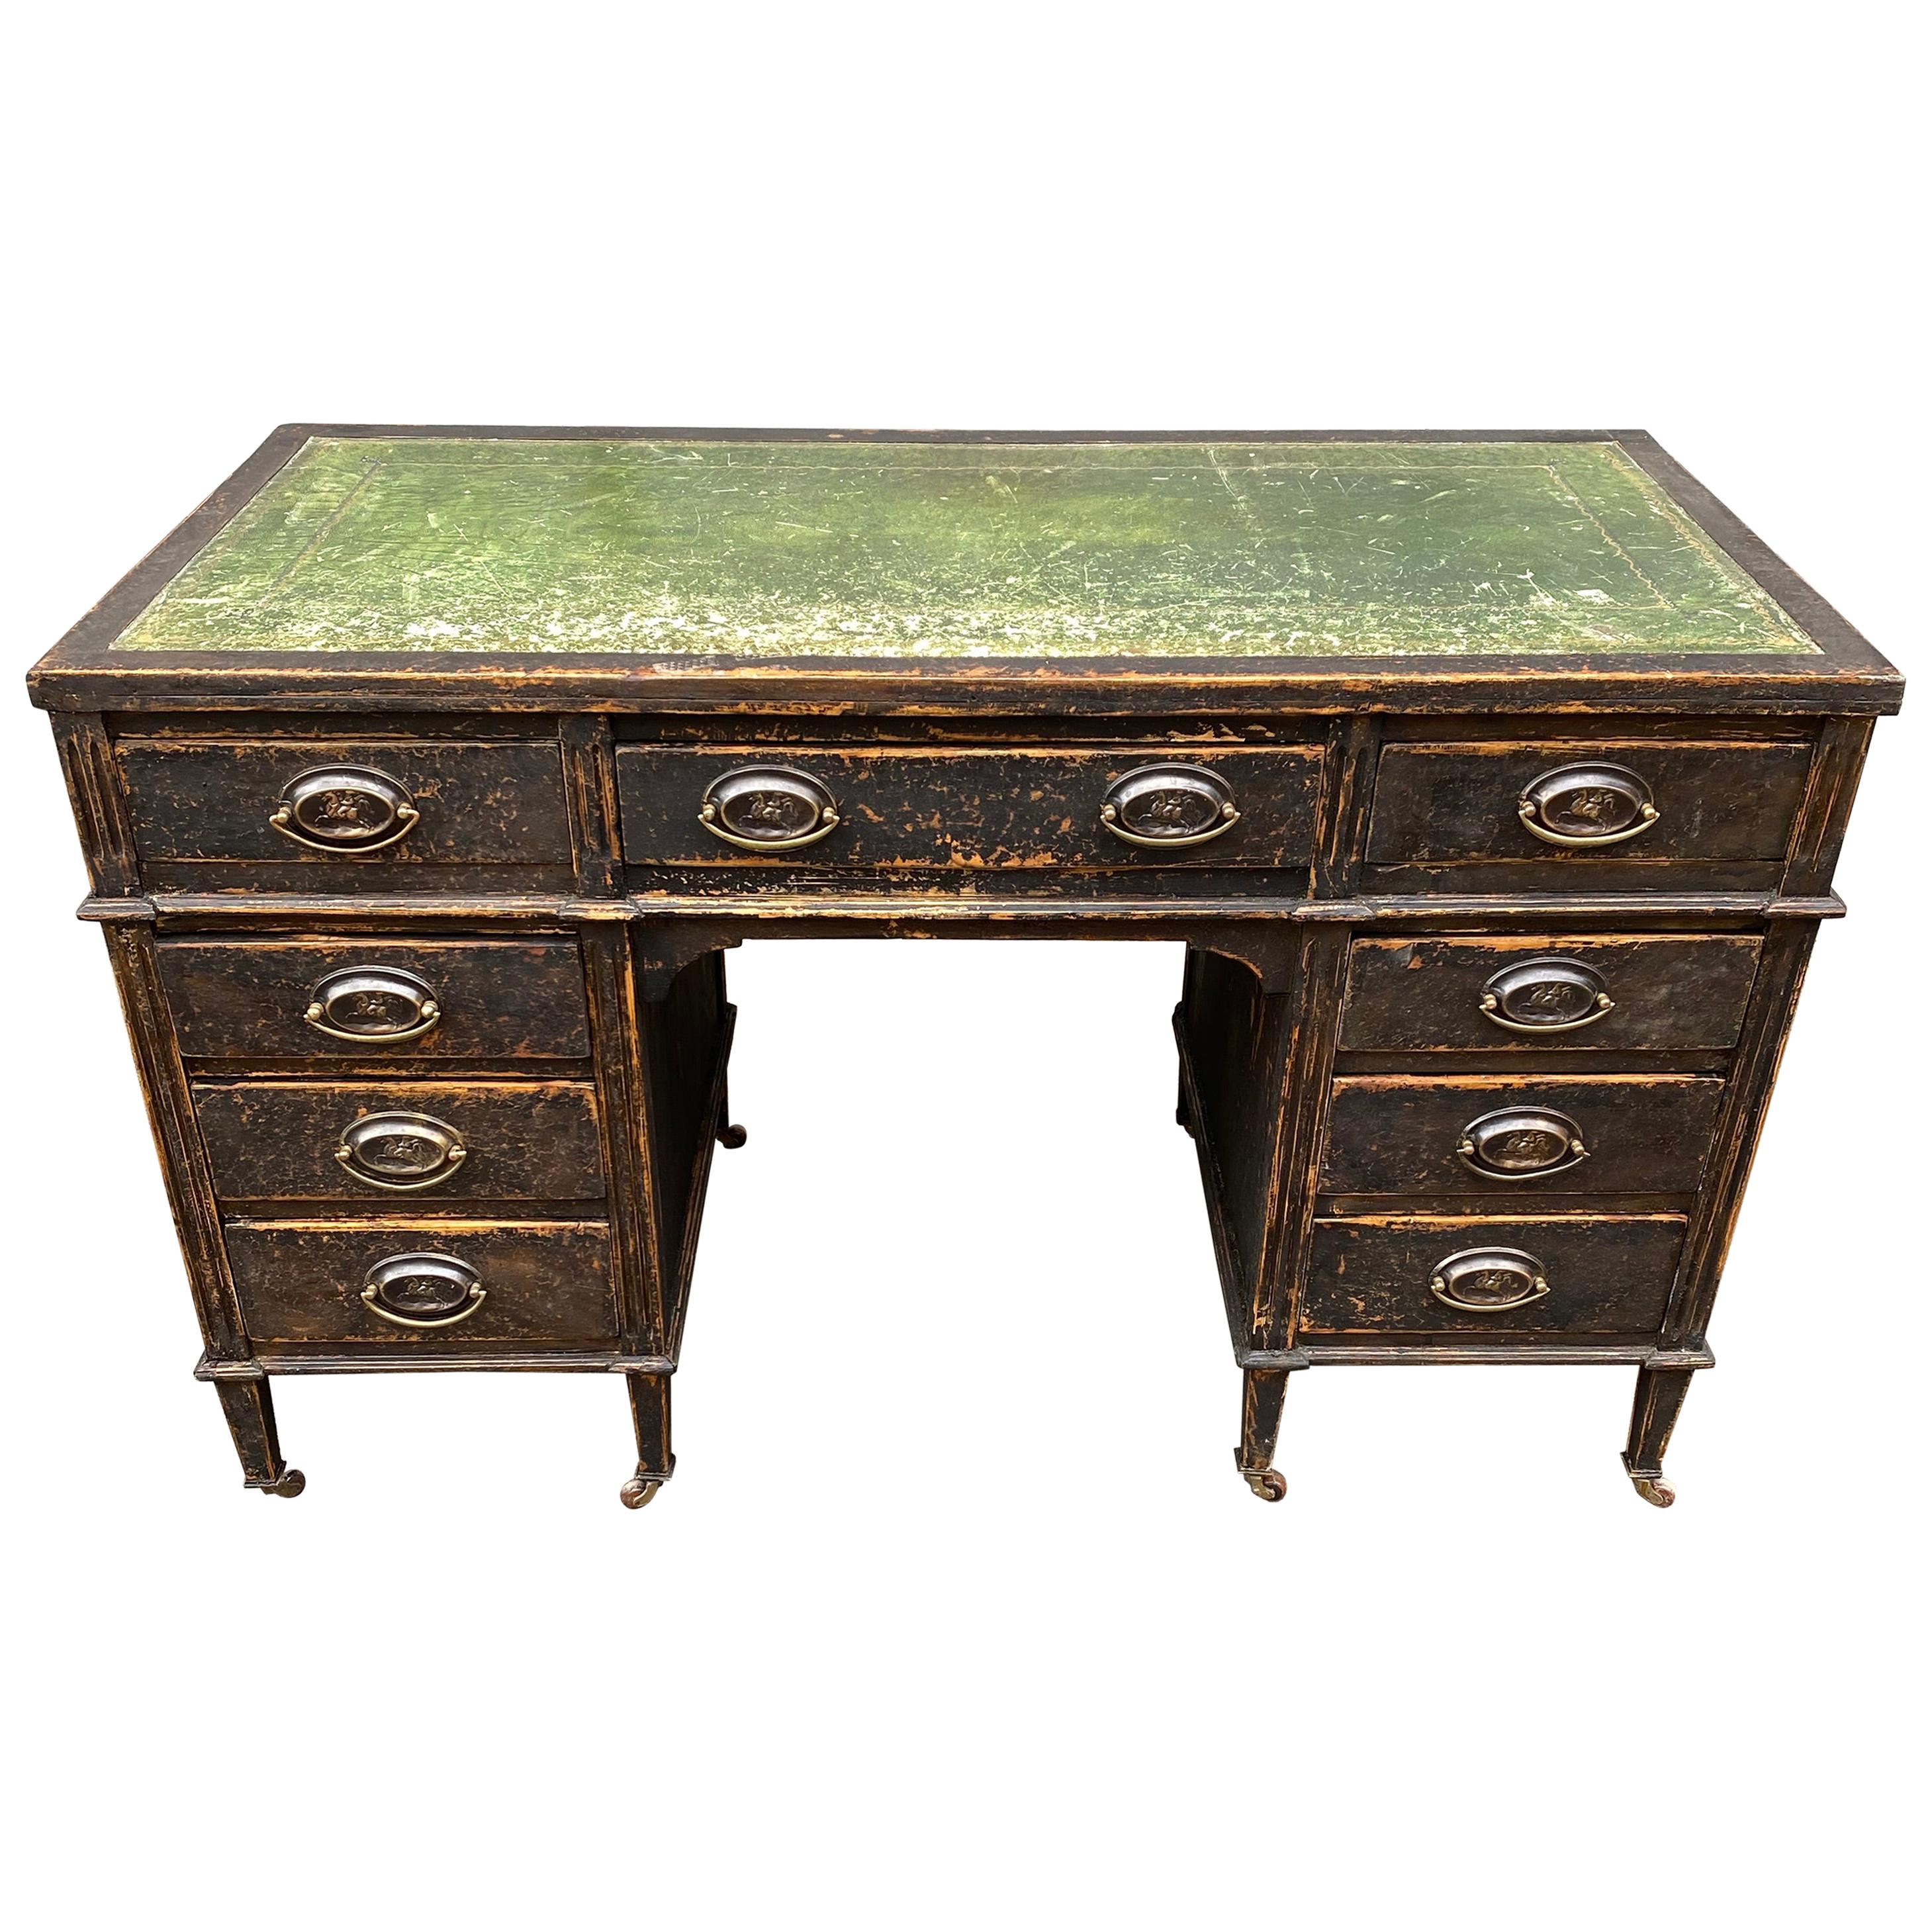 Gustavian Black Painted Executive Desk Green with Leather Top